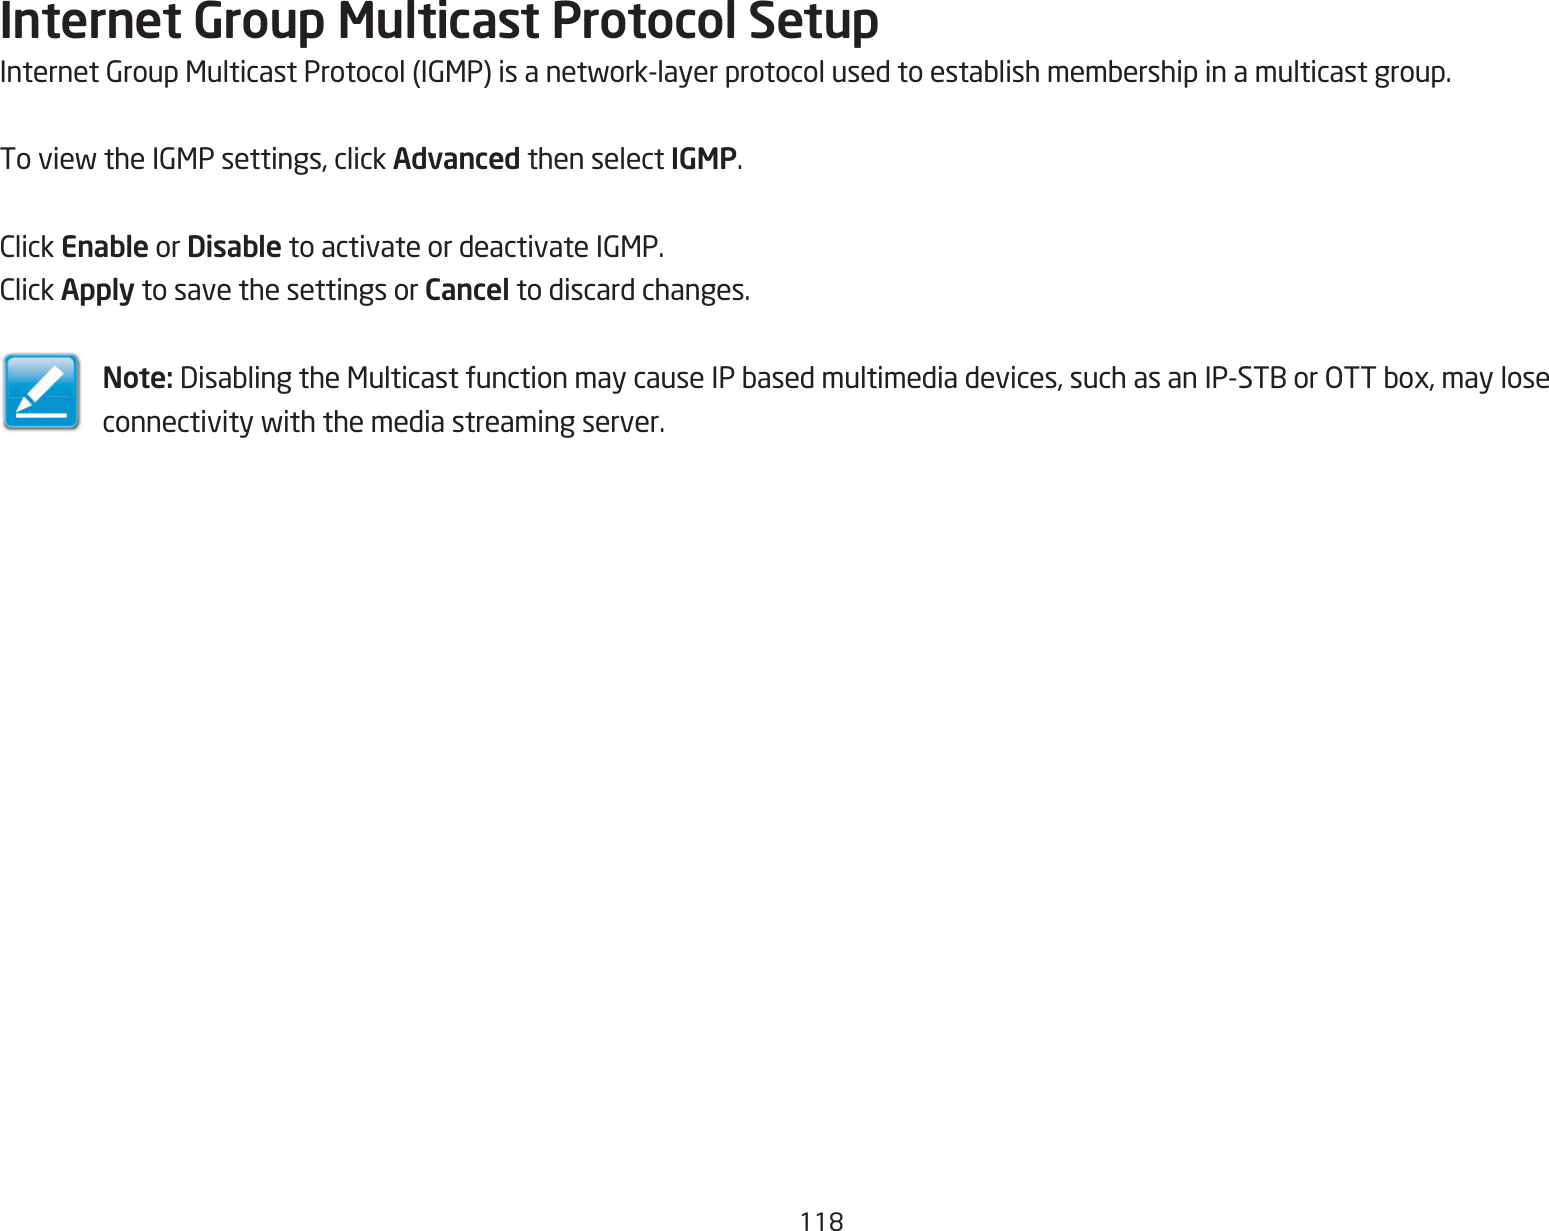 118Internet Group Multicast Protocol SetupInternetGroupMulticastProtocol(IGMP)isanetwork-layerprotocolusedtoestablishmembershipinamulticastgroup.ToviewtheIGMPsettings,clickAdvanced then select IGMP.ClickEnable or Disable toactivateordeactivateIGMP.ClickApply to save the settings or Cancel to discard changes.Note: DisablingtheMulticastfunctionmaycauseIPbasedmultimediadevices,suchasanIP-STBorOTTbox,mayloseconnectivitywiththemediastreamingserver.